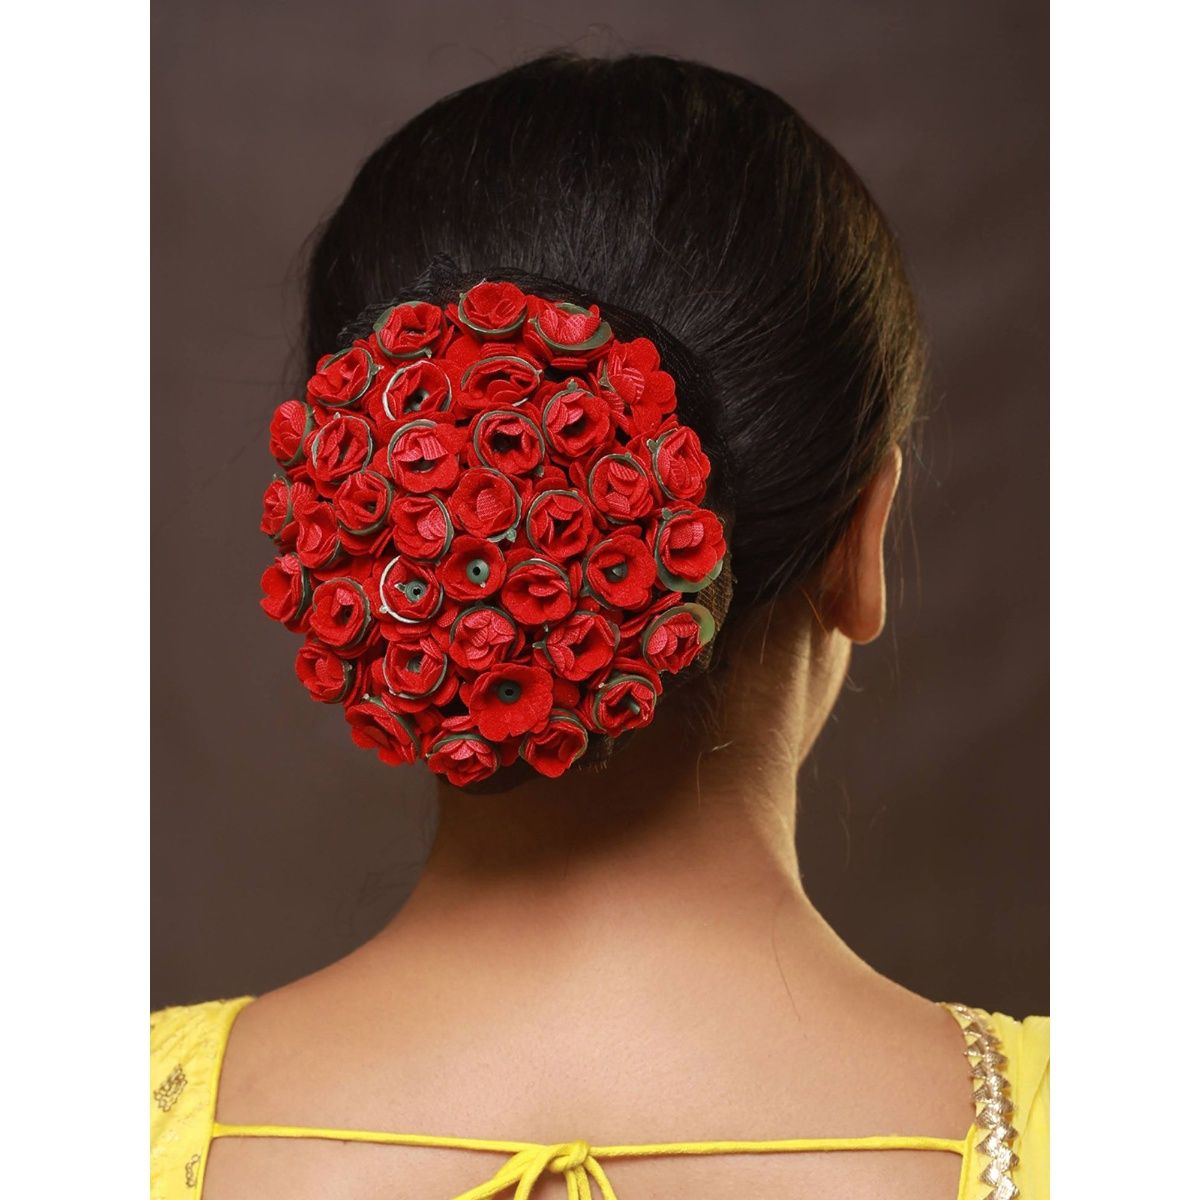 Instagram Alert! 🌸🌺 Fresh Flower Hairstyles - Super Pretty ways to use  Flowers in your Hair! - Witty Vows | Bridal hair buns, Indian bridal  hairstyles, Bridal hair inspiration